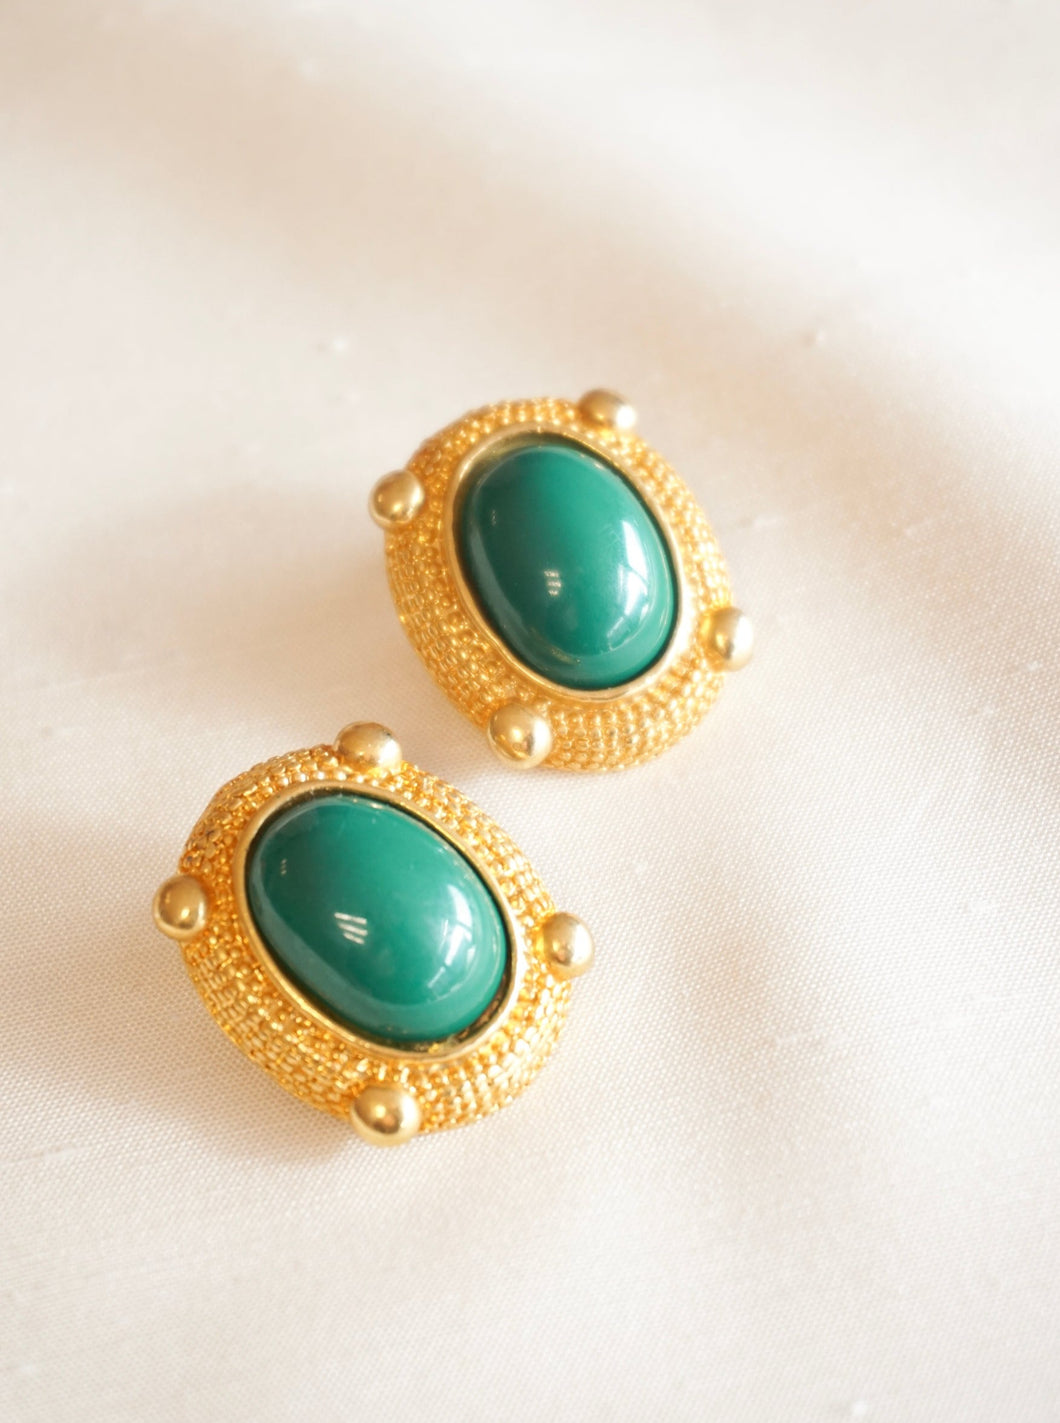 Green cabochon earrings with clips